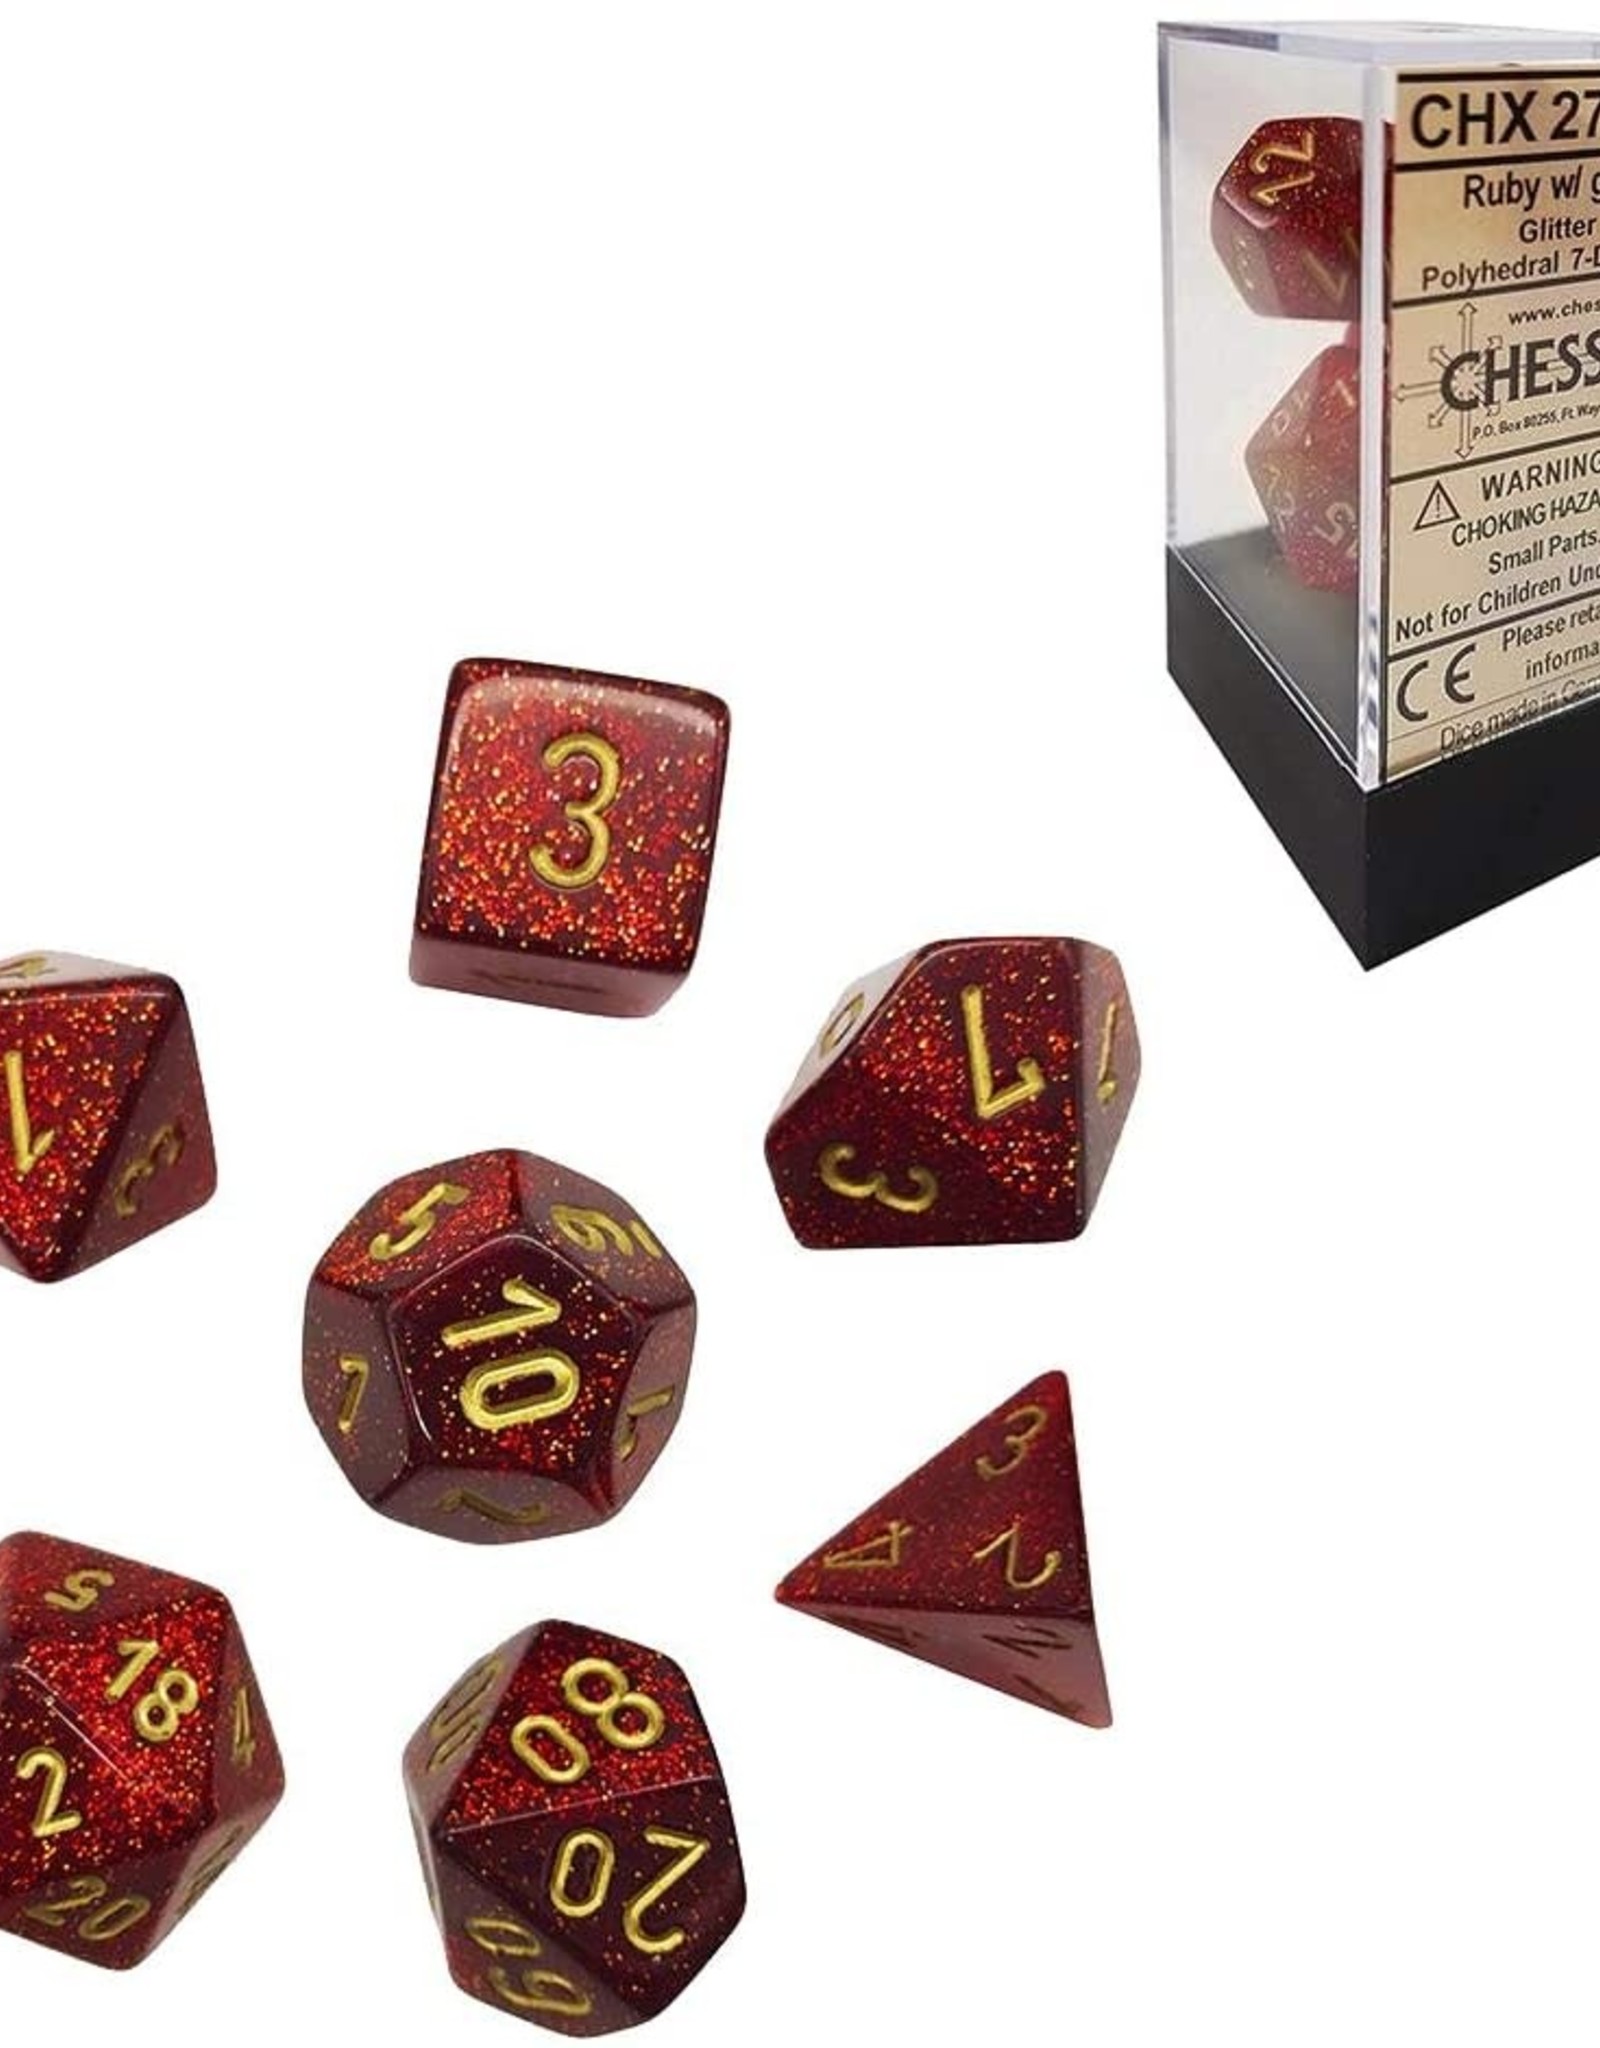 Chessex Glitter Ruby red/gold Polyhedral Set